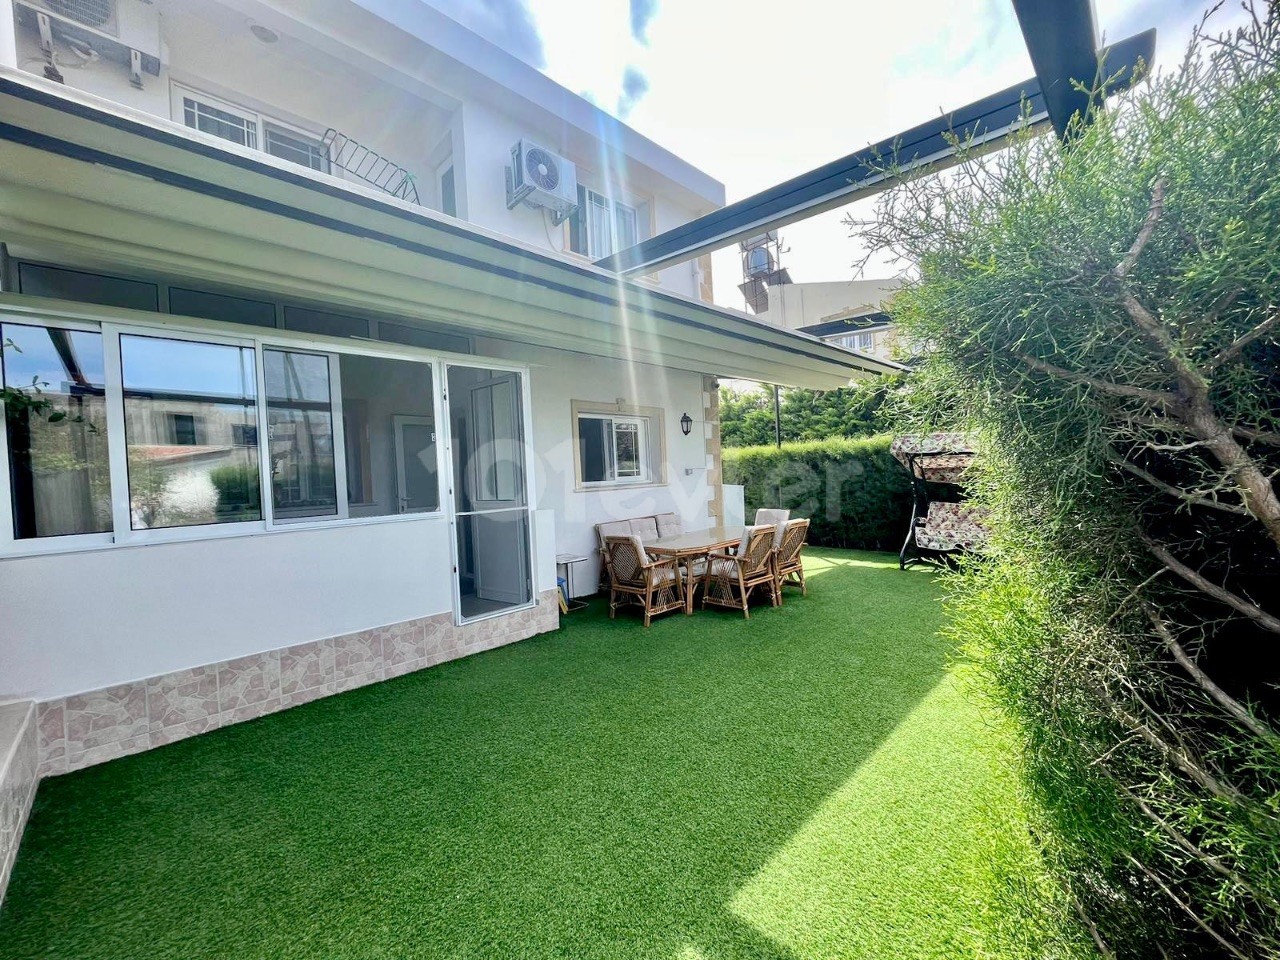 3+1 twin villa for sale in Alsancak, within walking distance to the sea, with garden, partially furnished, closed-plan kitchen, midwife, bathroom, ready deed, paid all expenses suitable for the loan